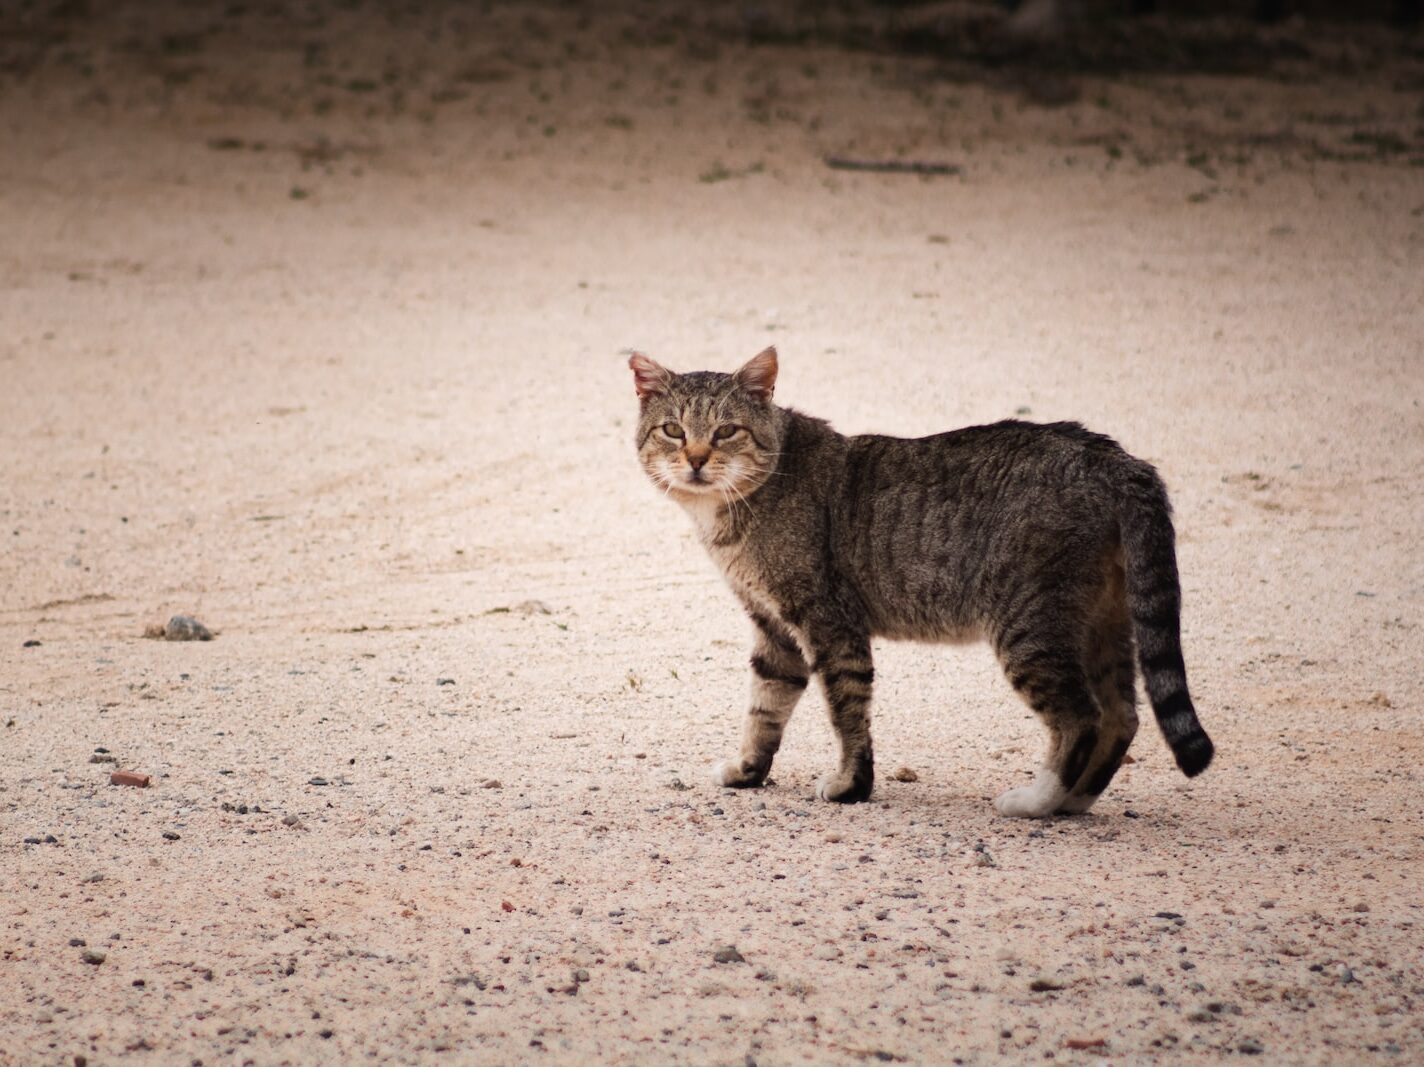 brown tabby cat walking on sand during daytime